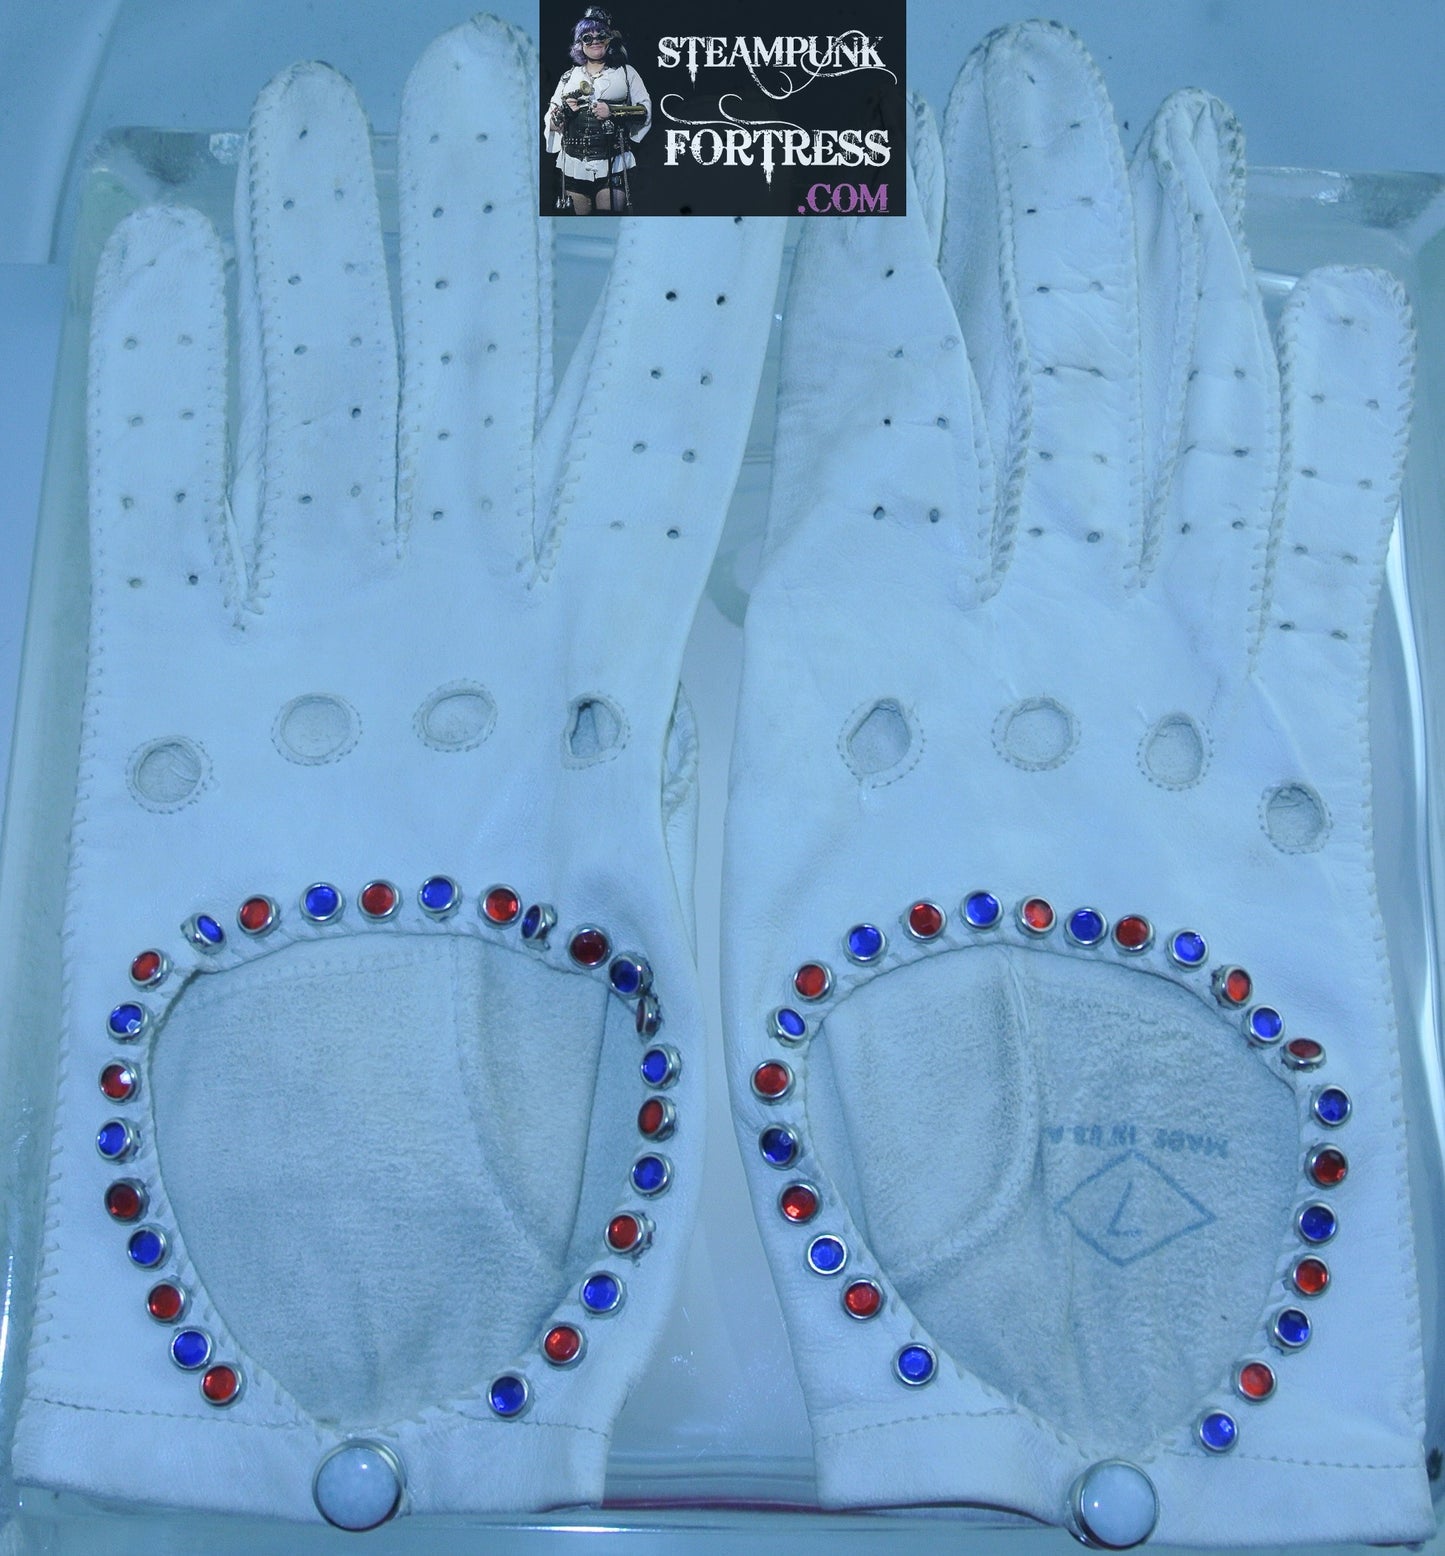 VINTAGE WHITE LEATHER SILVER RED BLUE STUDS DRIVING GLOVES SMALL COSPLAY COSTUME STARR WILDE STEAMPUNK FORTRESS